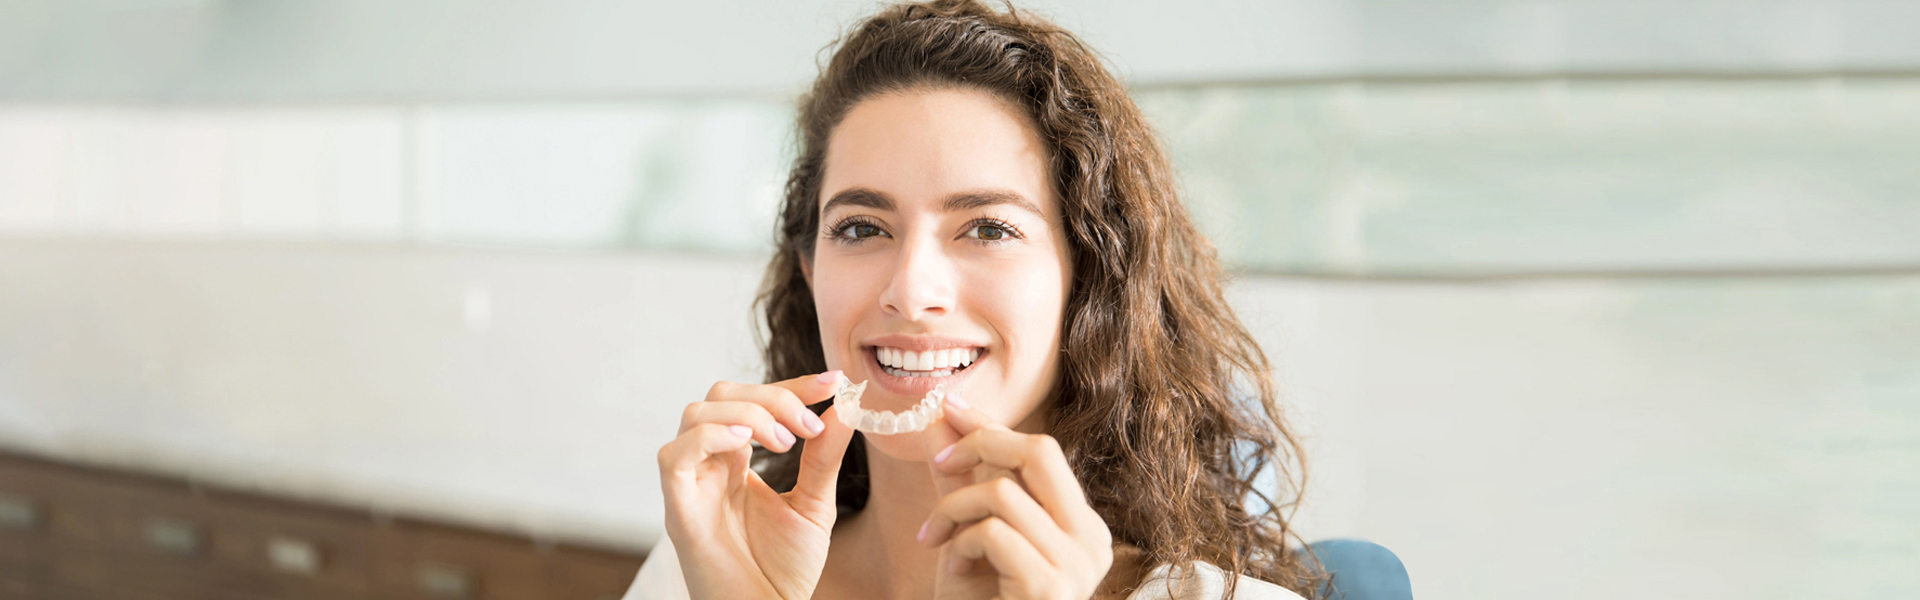 Invisalign® Is an Ingenious Way of Straightening Teeth Discreetly: Here’s Why